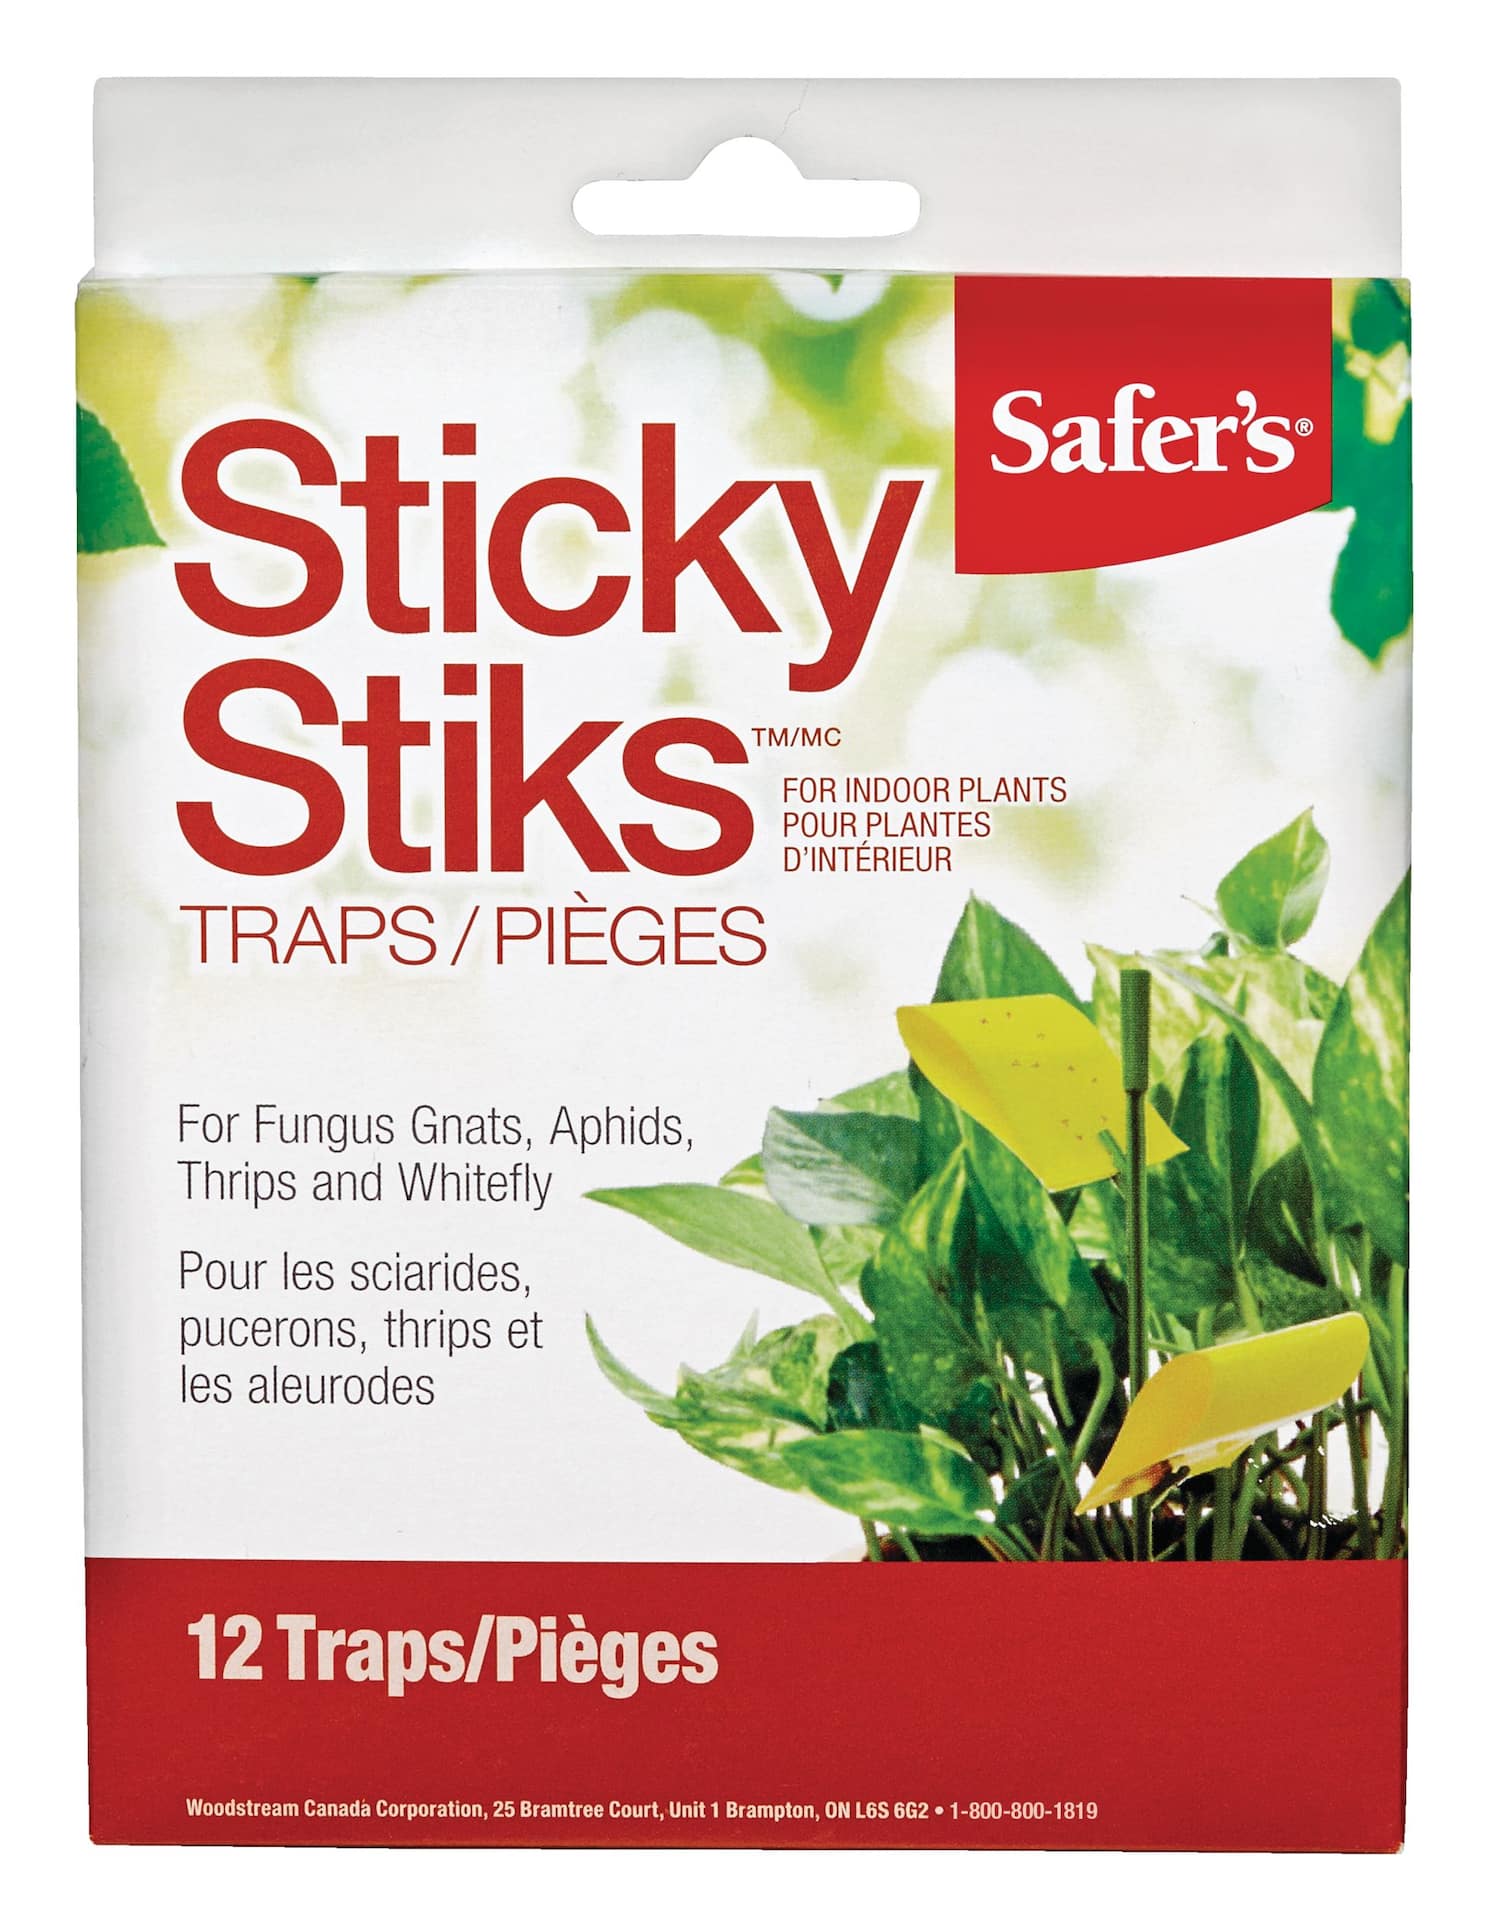 https://media-www.canadiantire.ca/product/seasonal-gardening/gardening/weed-insect-rodent-control/0591127/safer-s-sticky-sticks-12-pack-8b174deb-02ac-421a-ab0b-caefdfca9d12-jpgrendition.jpg